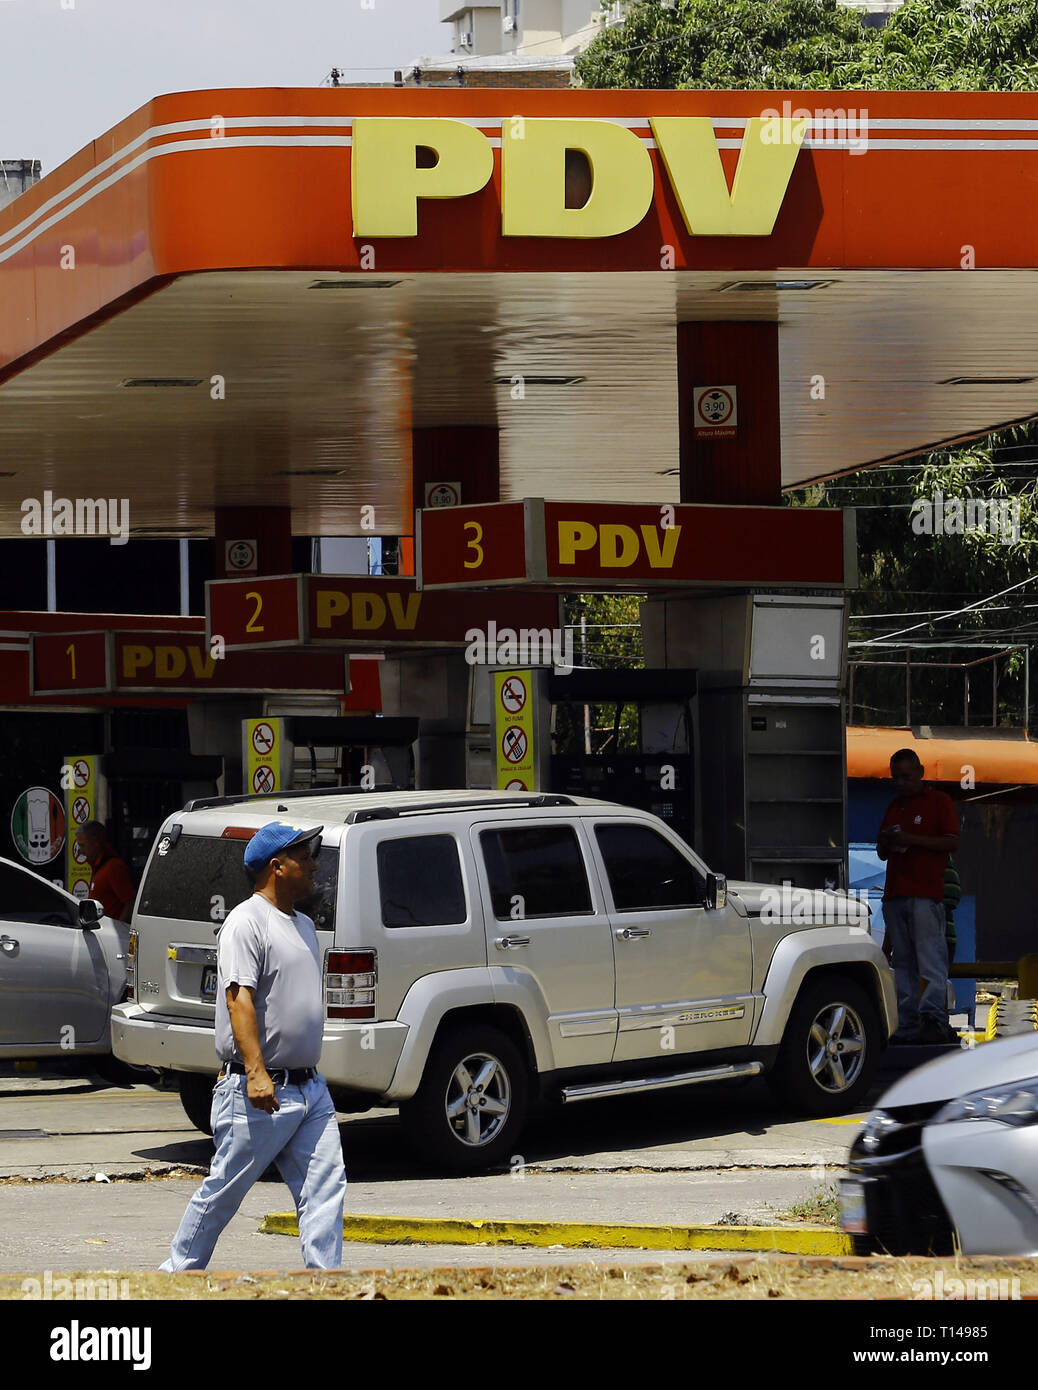 Valencia, Carabobo, Venezuela. 23rd Mar, 2019. March 23, 2019. Service station of Petroleos de Venezuela, PDVSA, official company of the oil industry of Venezuela, recently sanctioned by the government of the United States as a measure of pressure against the regime of Nicolas Maduro. Photo: Juan Carlos Hernandez. Credit: Juan Carlos Hernandez/ZUMA Wire/Alamy Live News Stock Photo